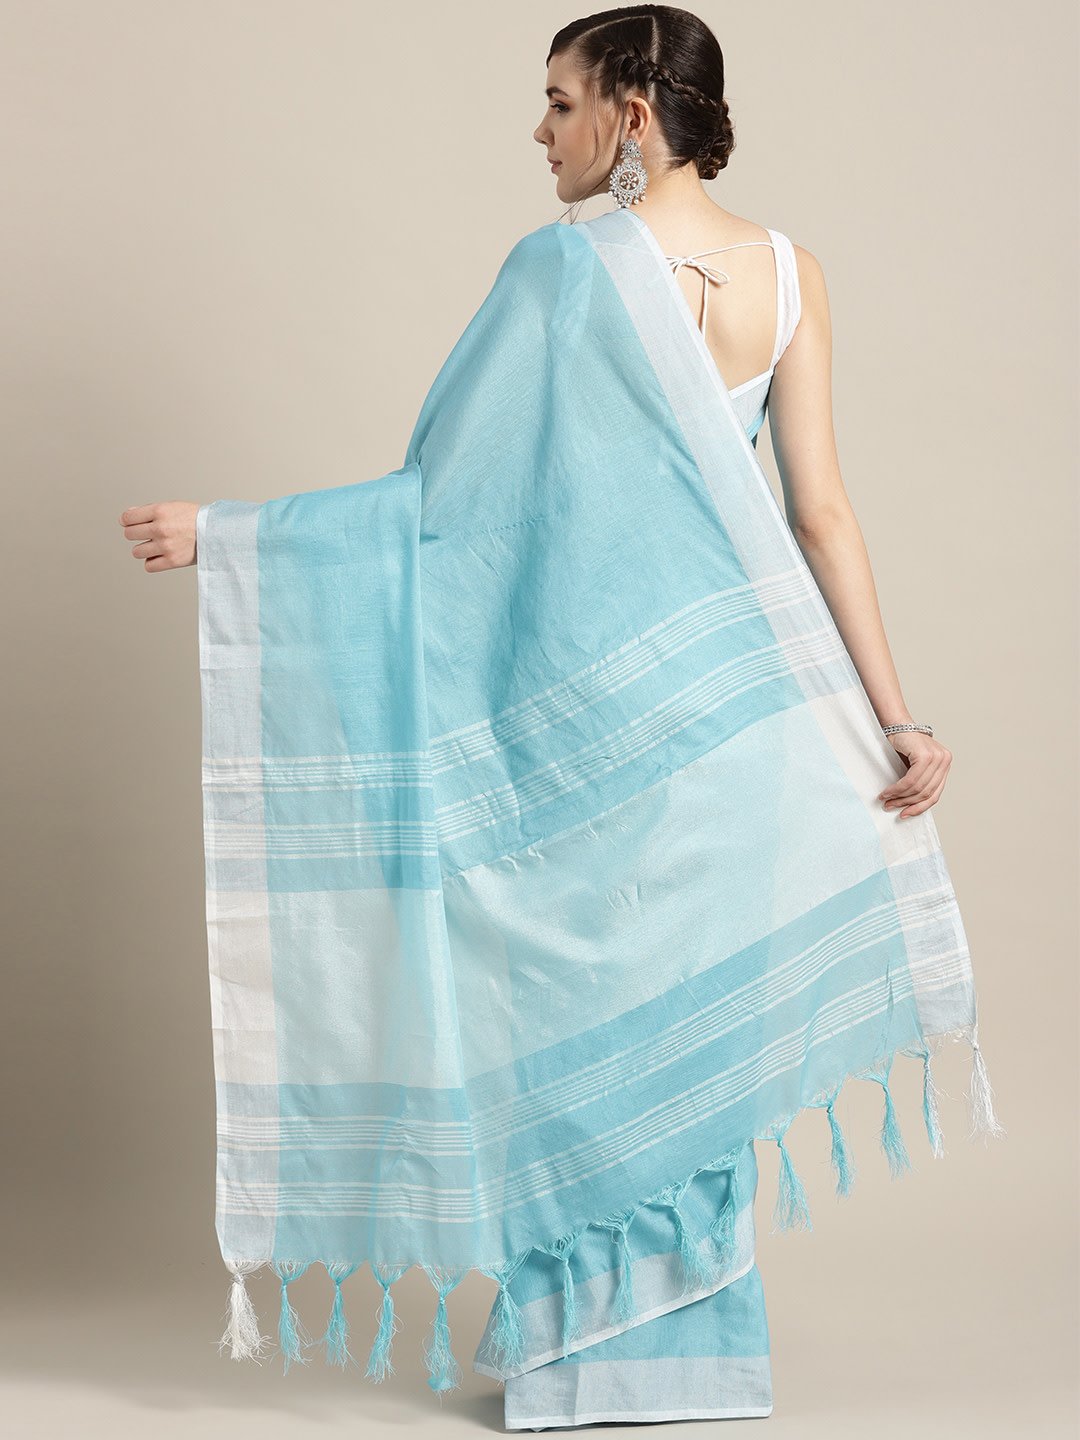 Ishin Poly Cotton Blue Woven Women's Saree With Tassels